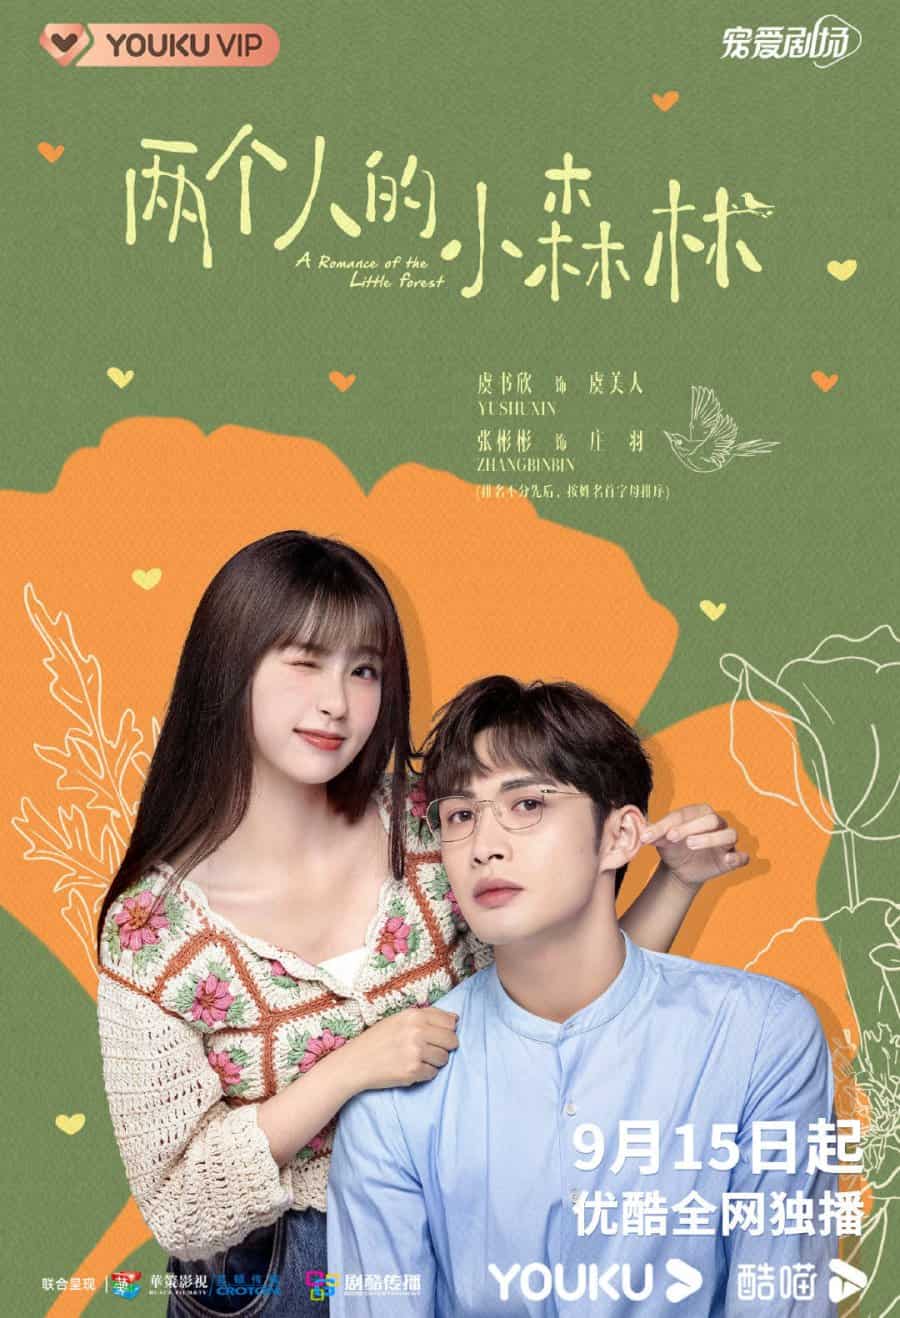 A Romance of The Little Forest - Sinopsis, Pemain, OST, Episode, Review